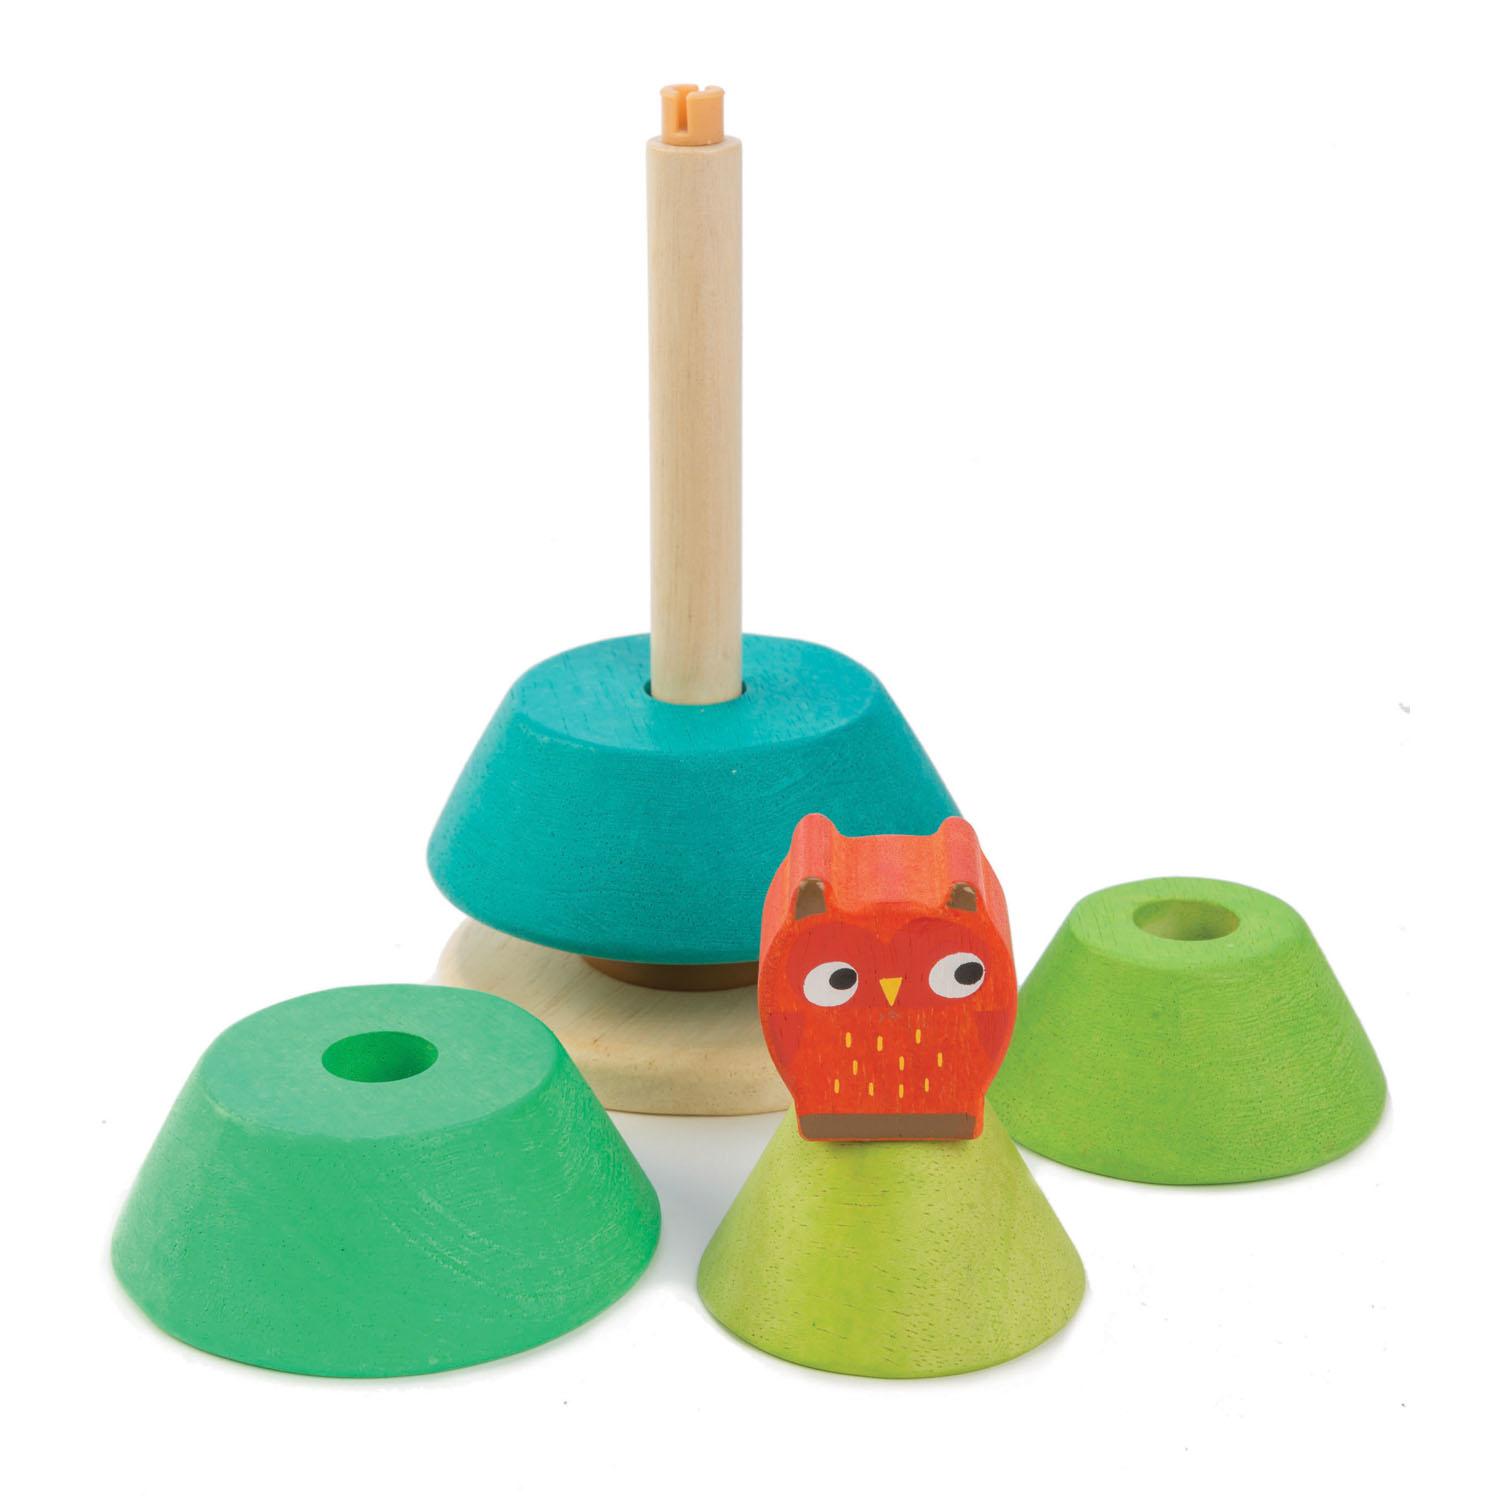 New Wooden Toy Stacking Fir Tree Topped with a Red Owl #3